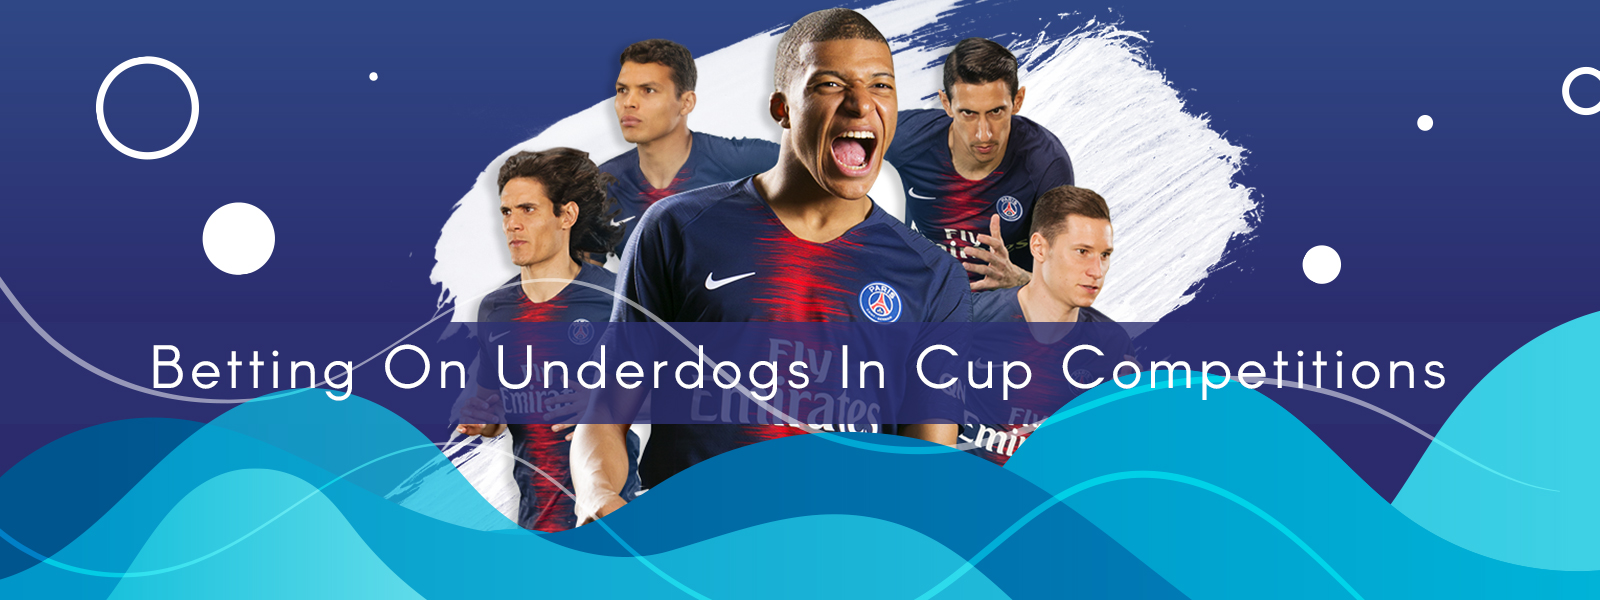 SoccerTipsters Blog | Betting On Underdogs In Cup Competitions